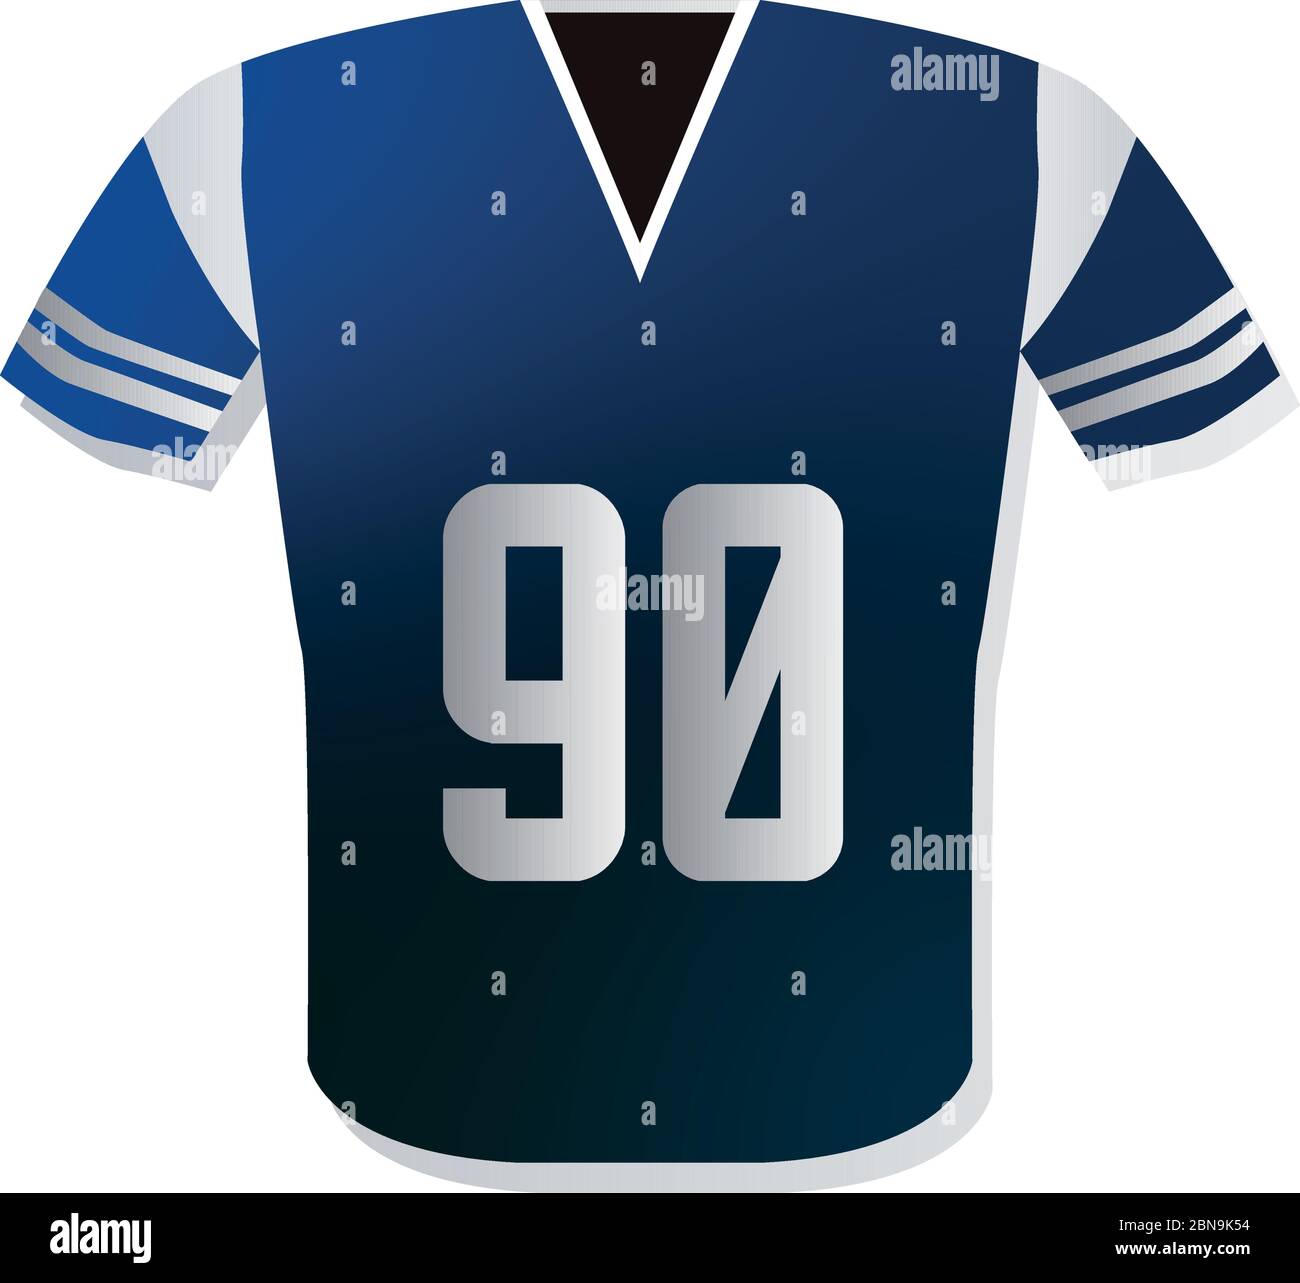 19,462 American Football Shirt Designs Images, Stock Photos, 3D objects, &  Vectors